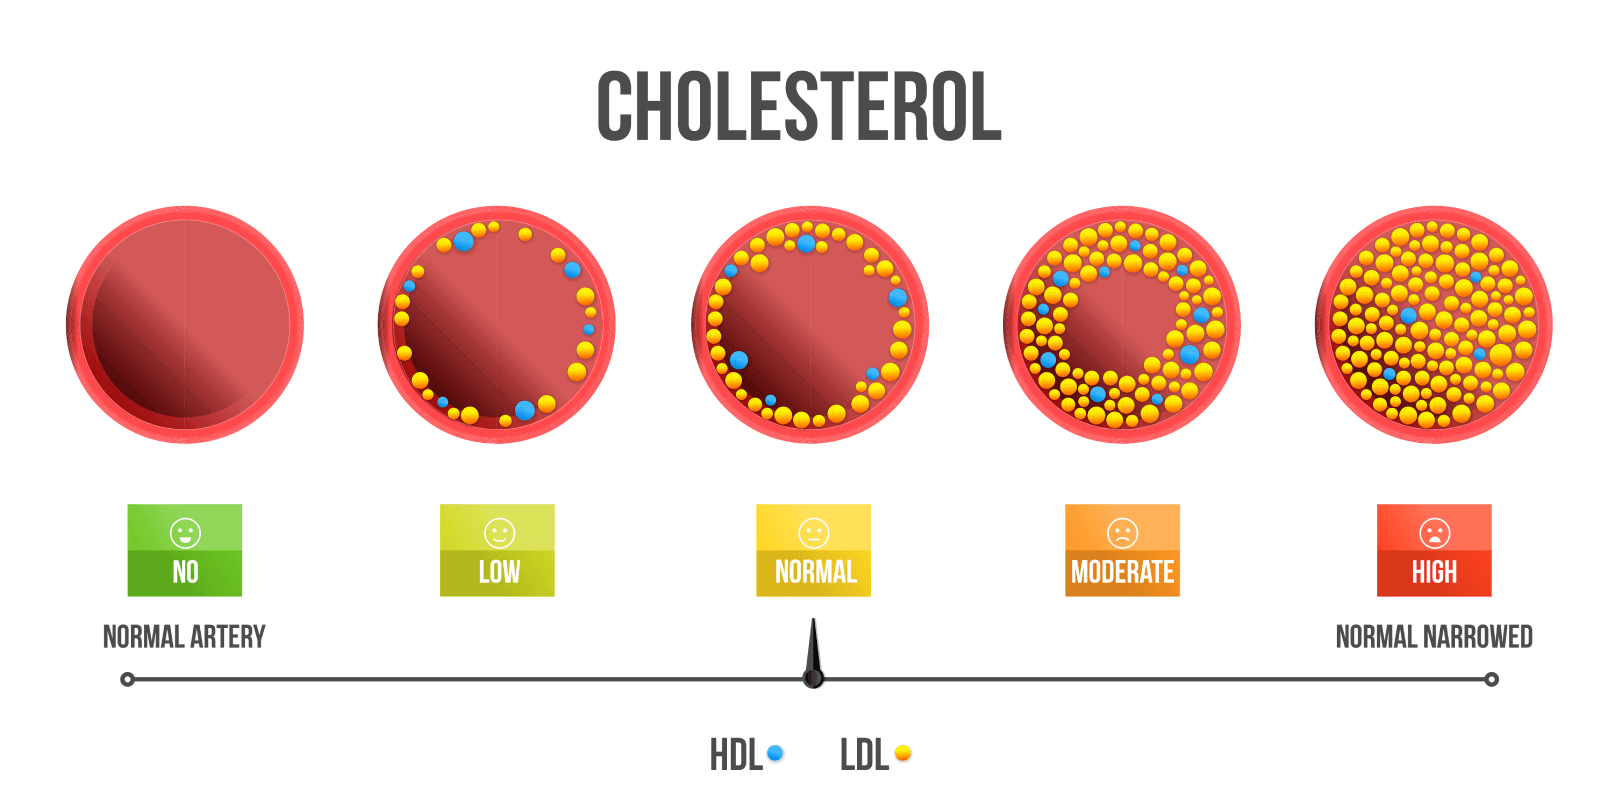 High Cholesterol: Overview, Symptoms, Causes and Treatment